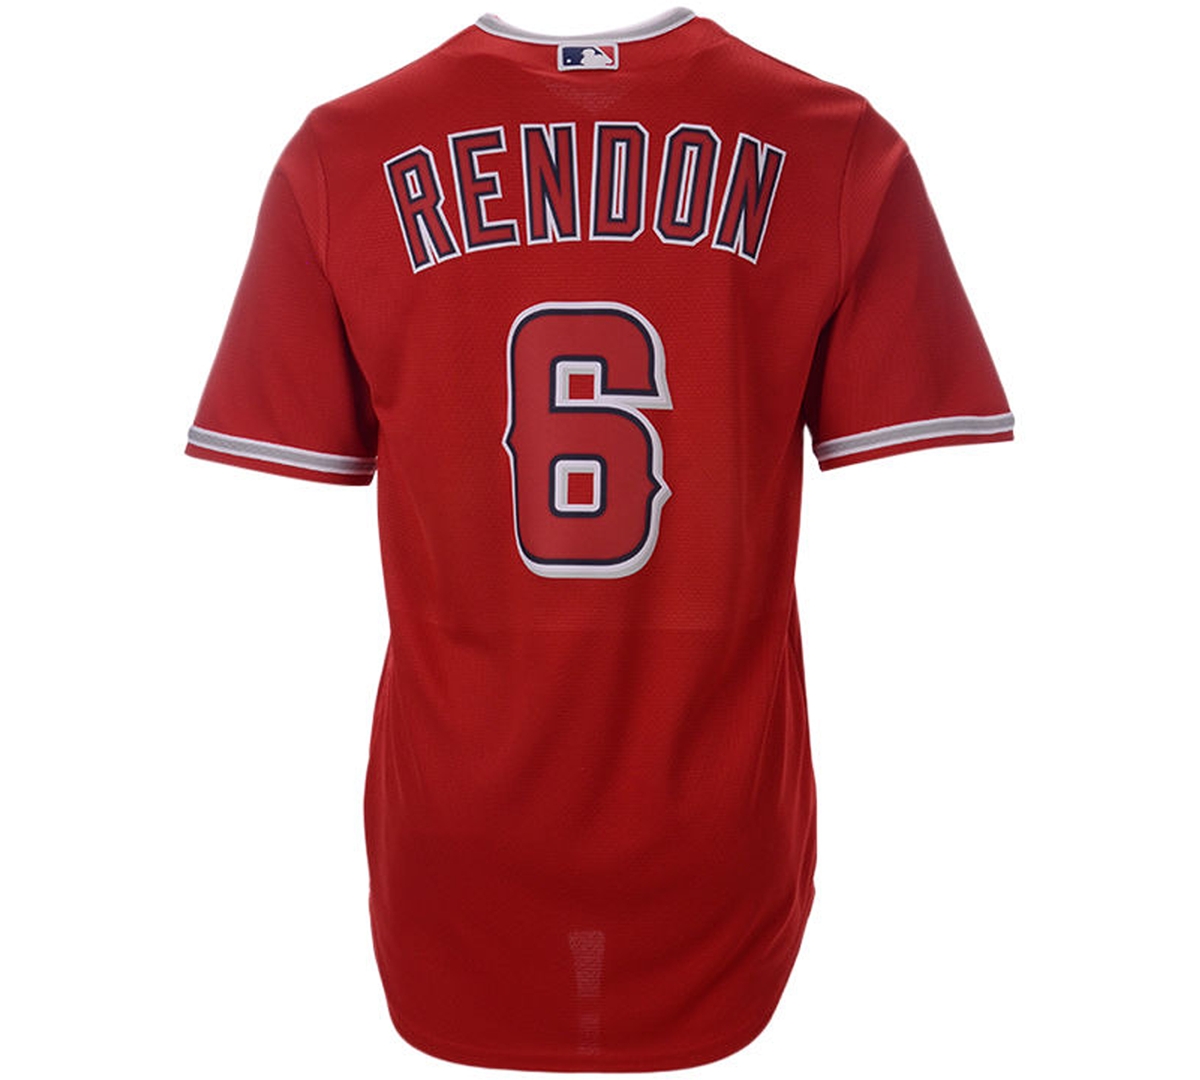 Nike Men's Anthony Rendon Los Angeles Angels Official Player Replica Jersey